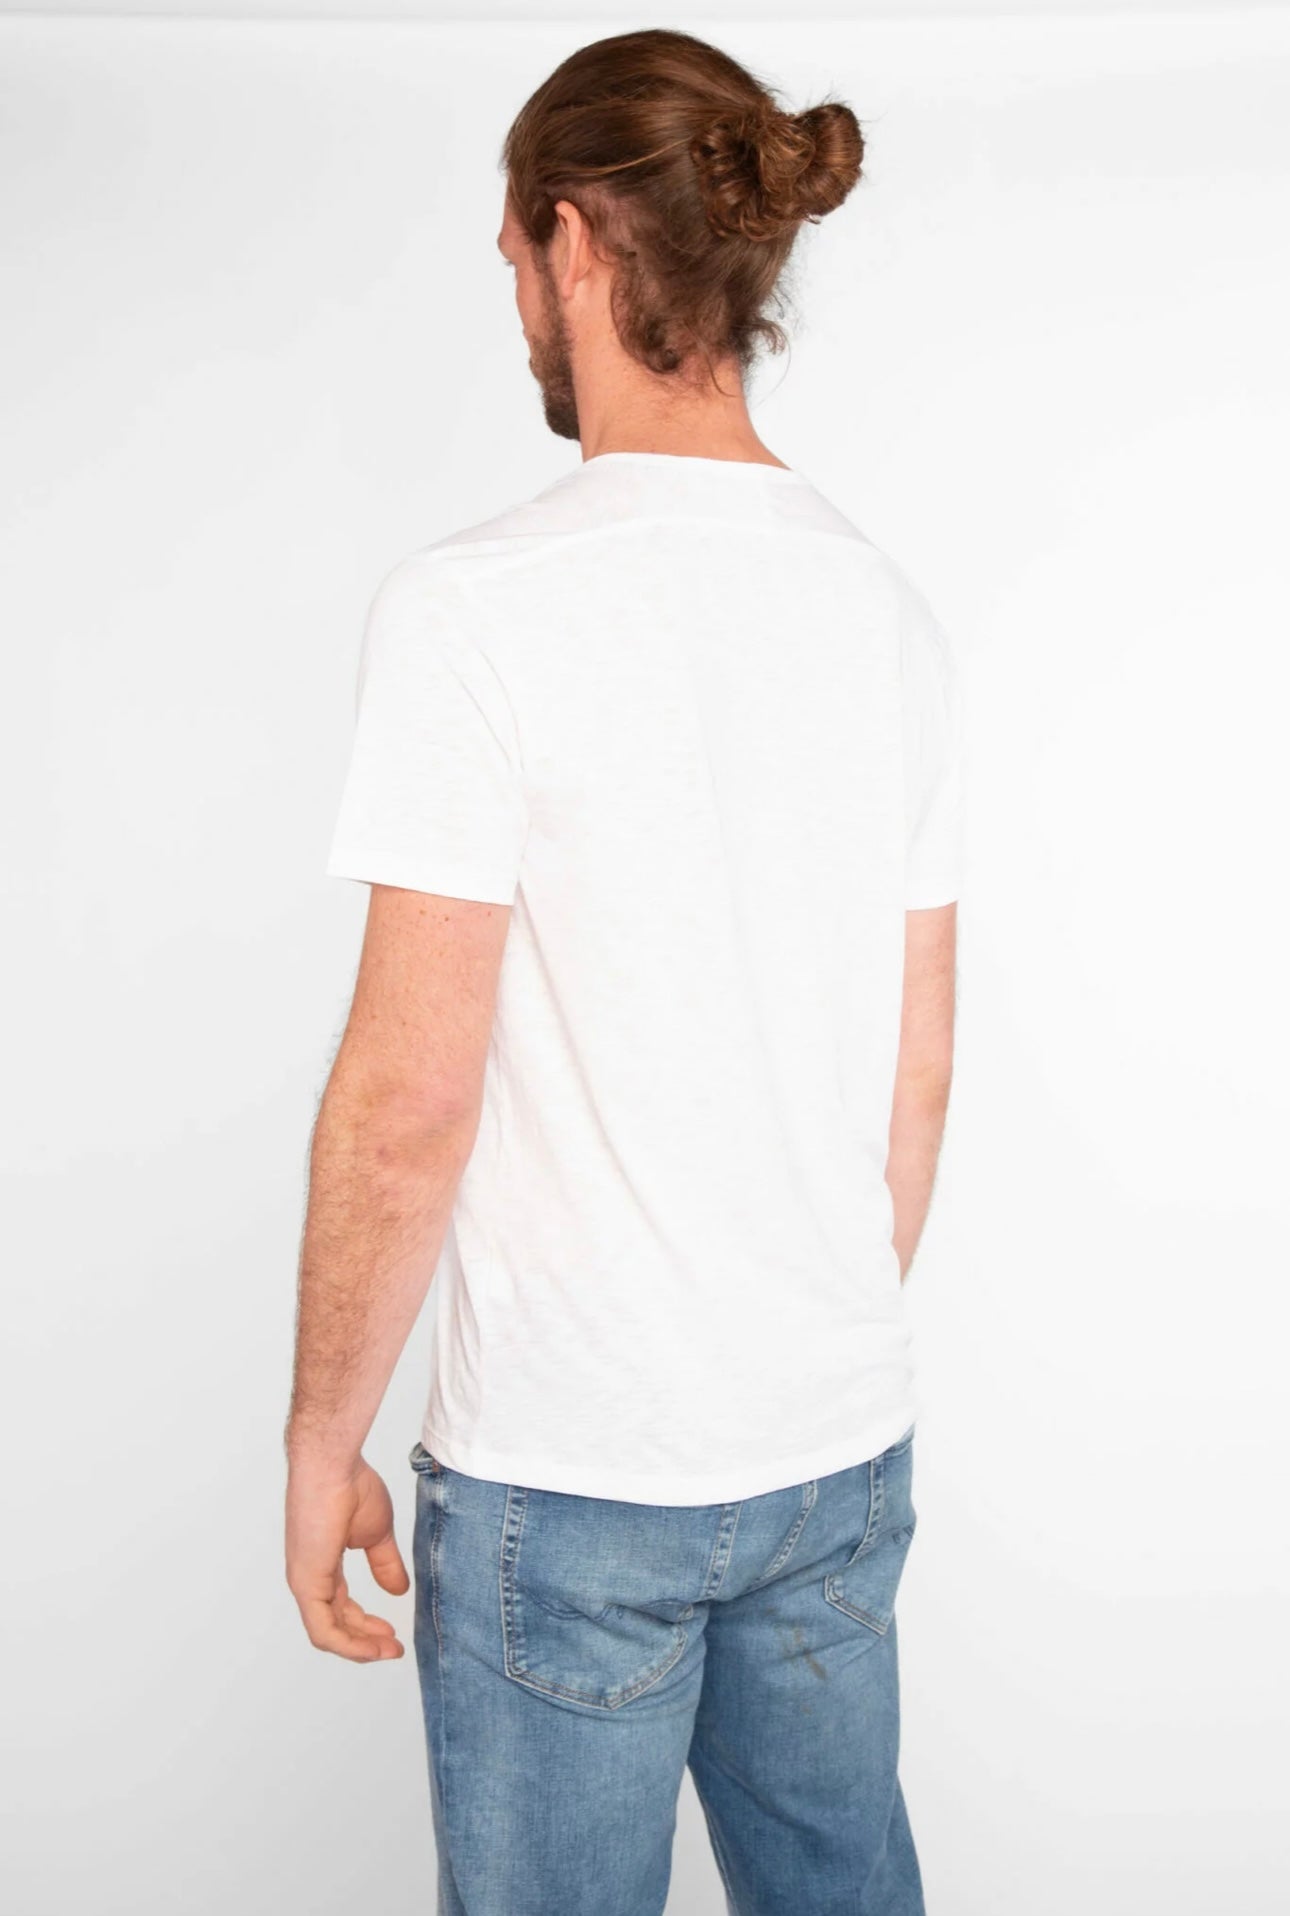 Anonym - T-shirt Hector White Flamme